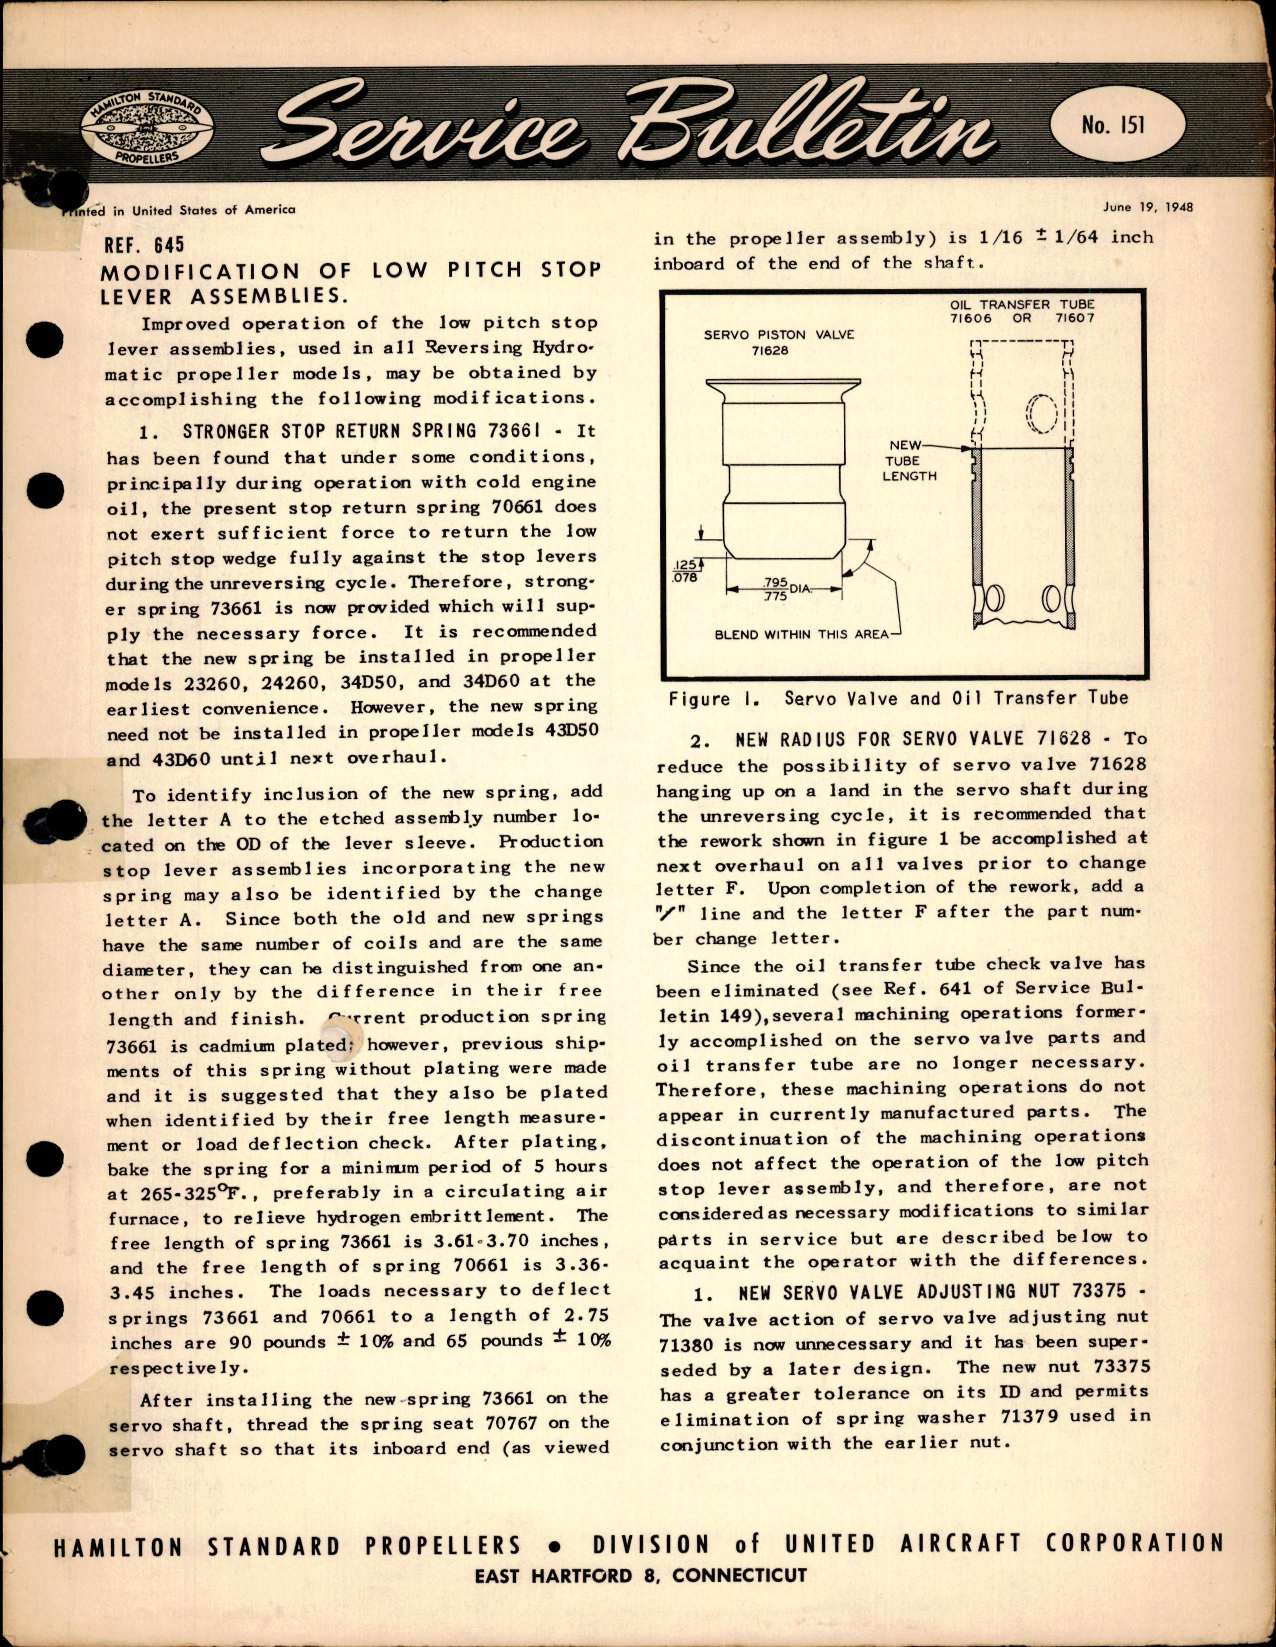 Sample page 1 from AirCorps Library document: Modification of Low Pitch Stop Lever Assemblies, Ref 645